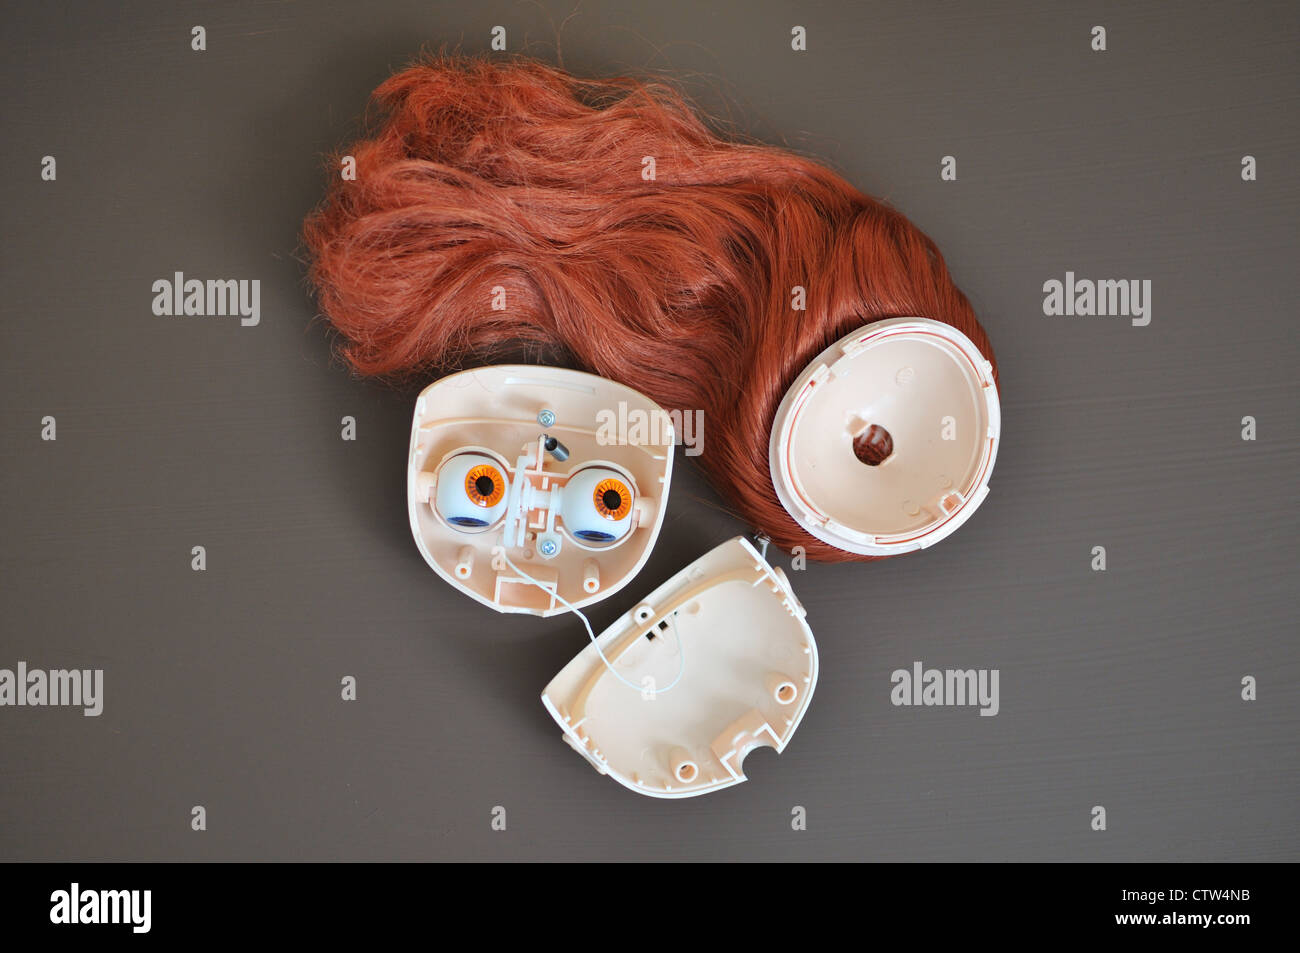 Blythe doll head dismounted showing the eye mechanism in the head Stock  Photo - Alamy